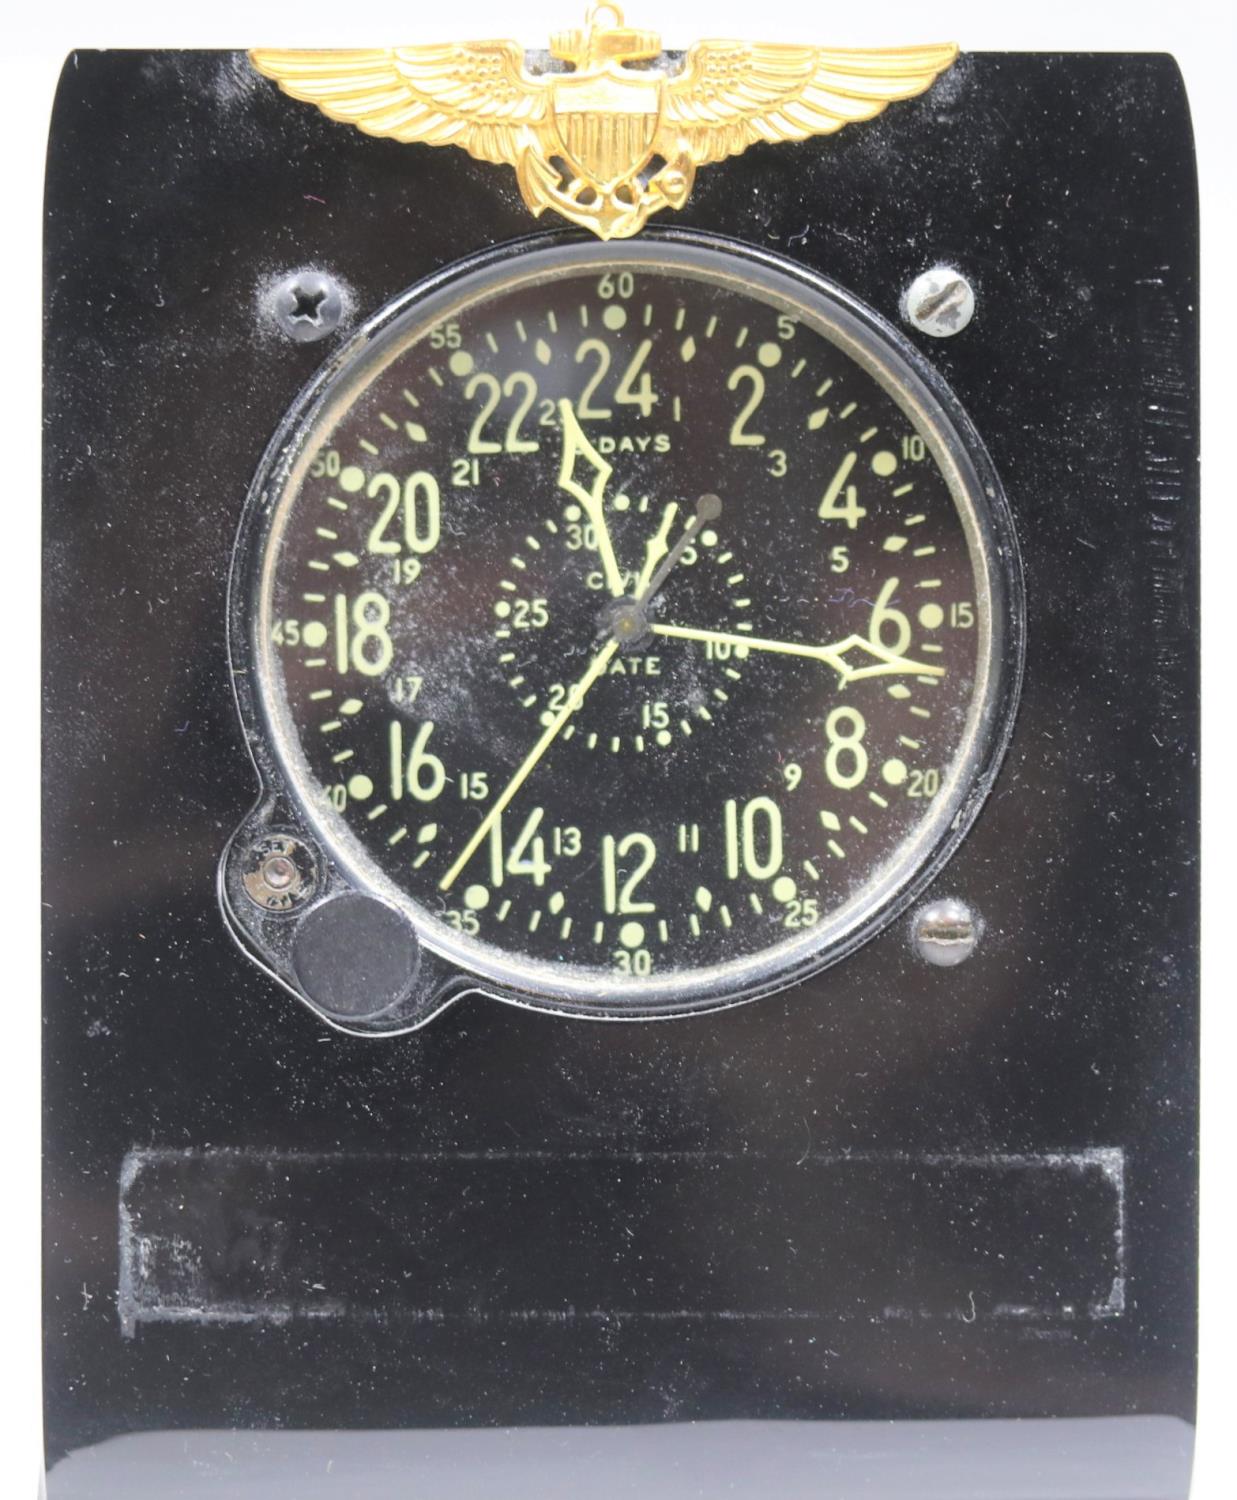 Waltham cockpit clock. Bakelite and aluminium housing with plastic stand. USN wings afixed to stand.